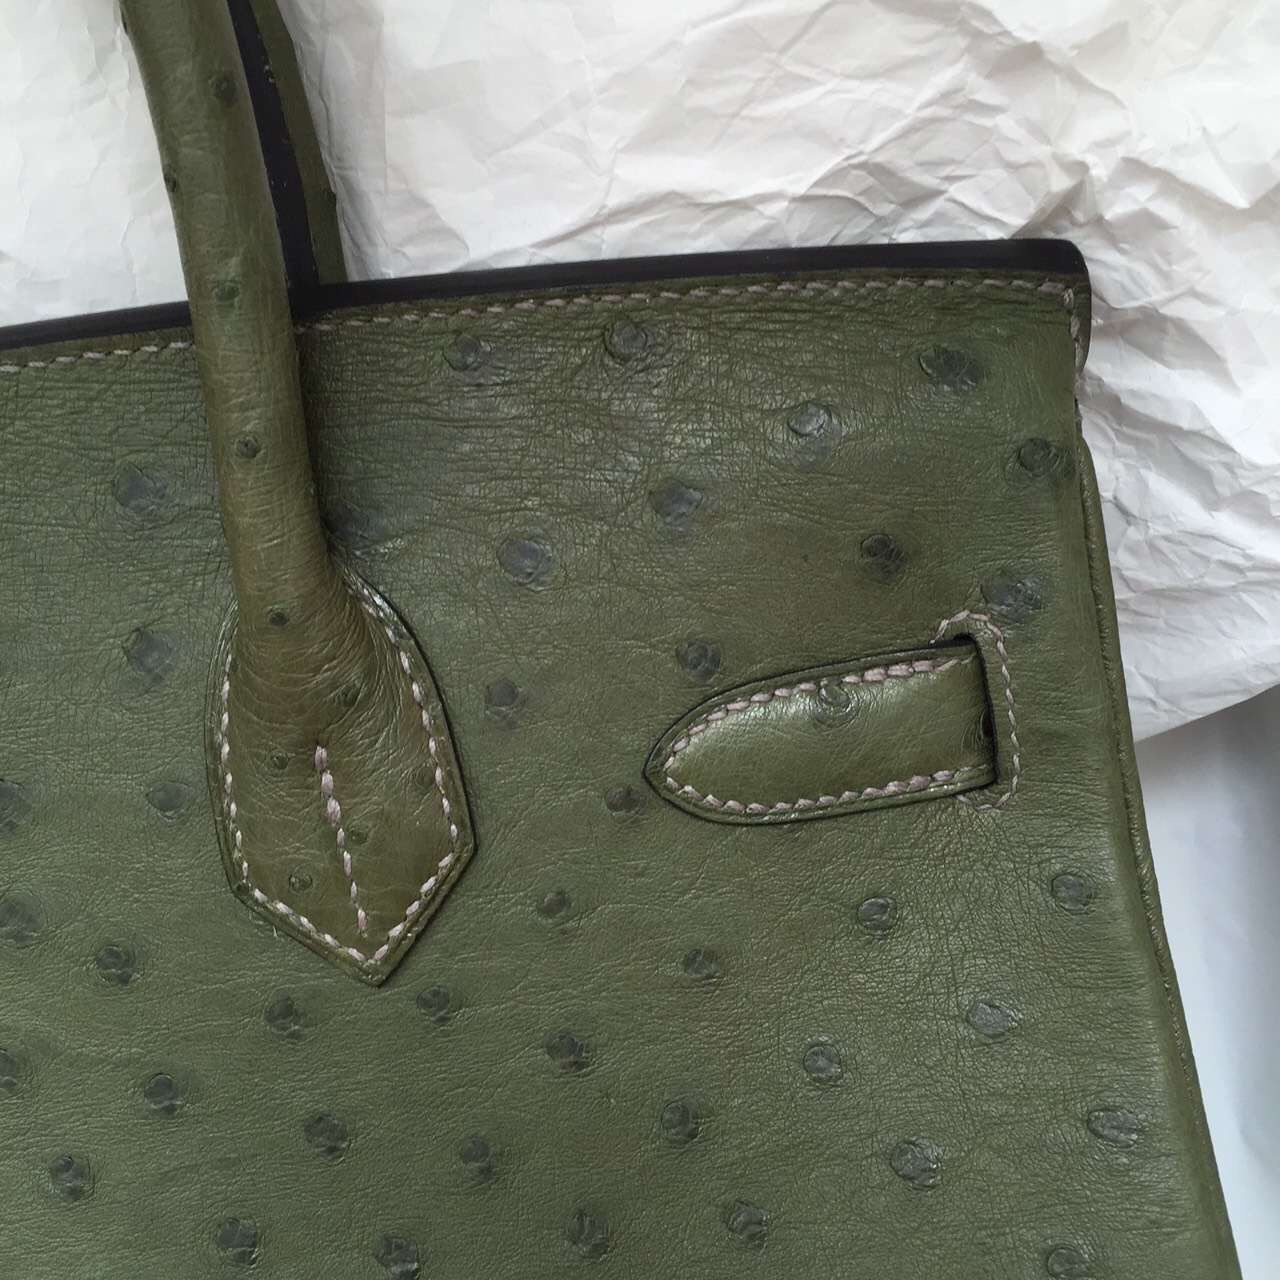 Hand Stitching Hermes Birkin 30CM in V6 Canopee Green Ostrich Leather Tote Bag